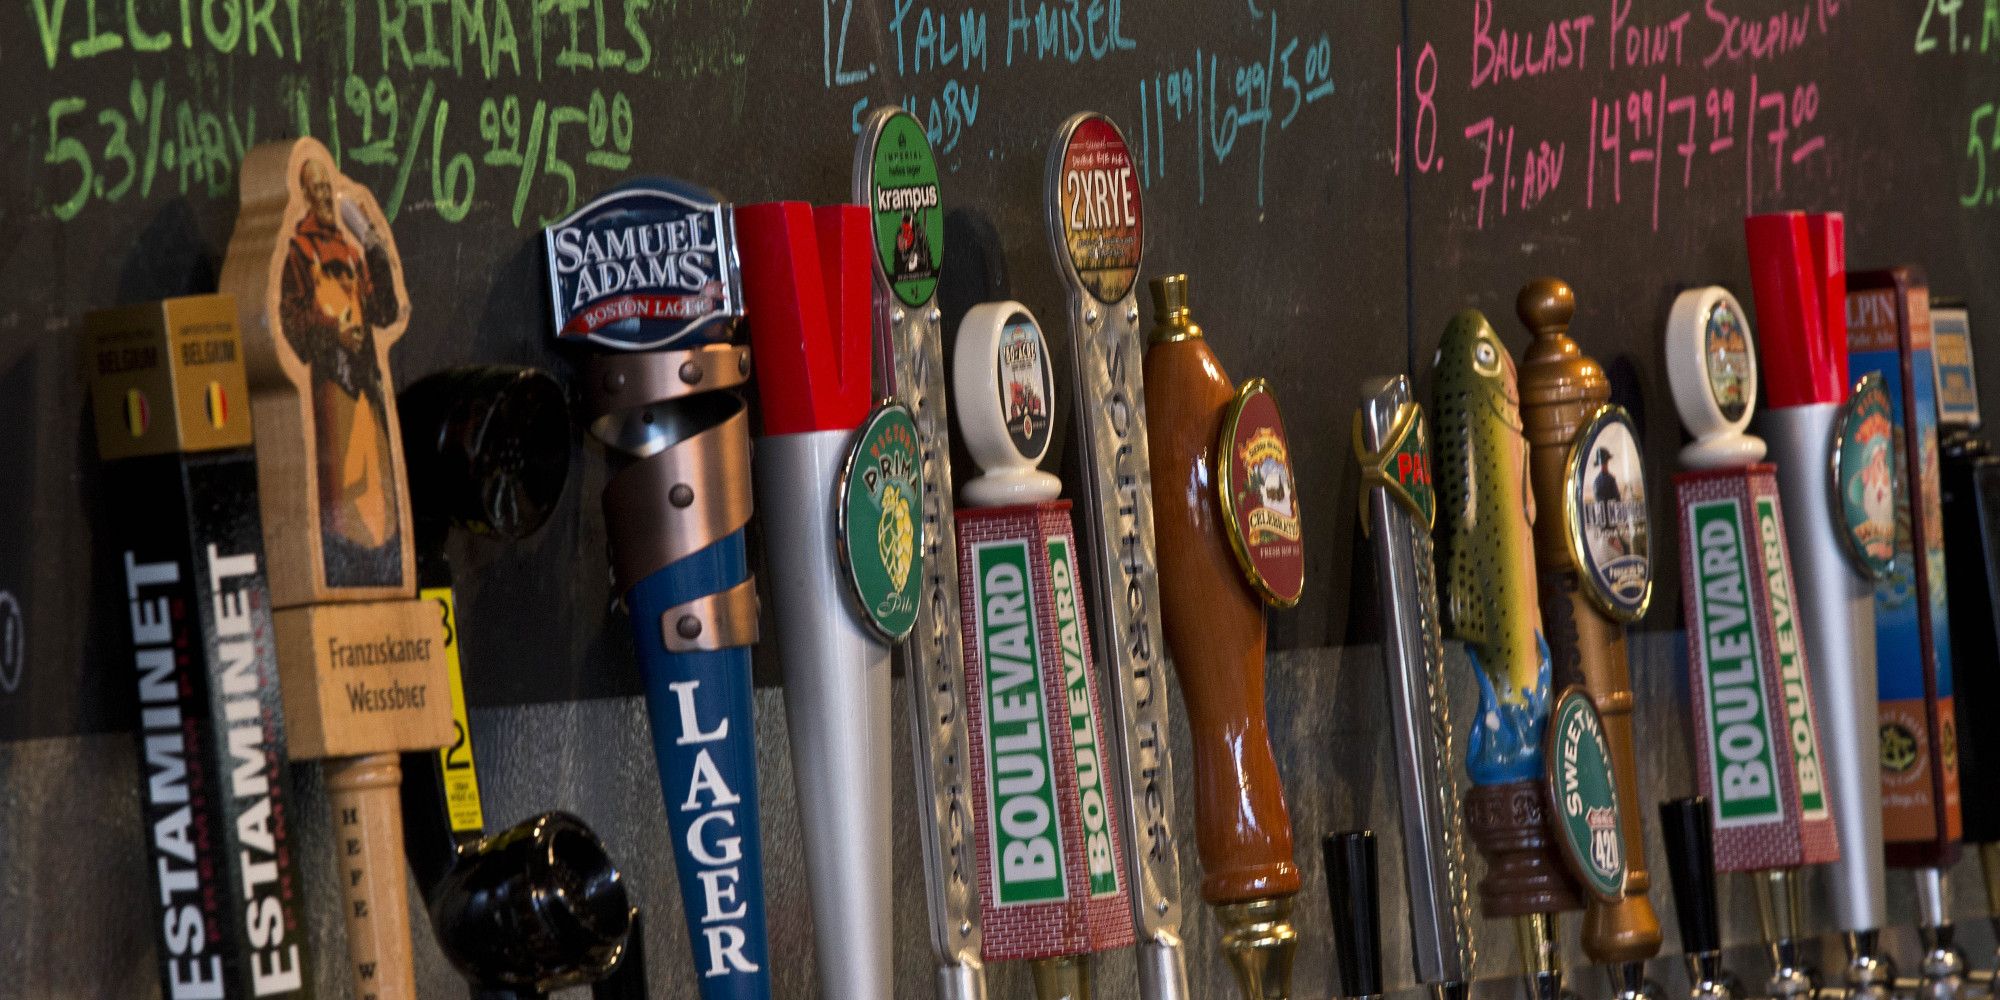 The Top 50 Craft Breweries In America According To The Brewers